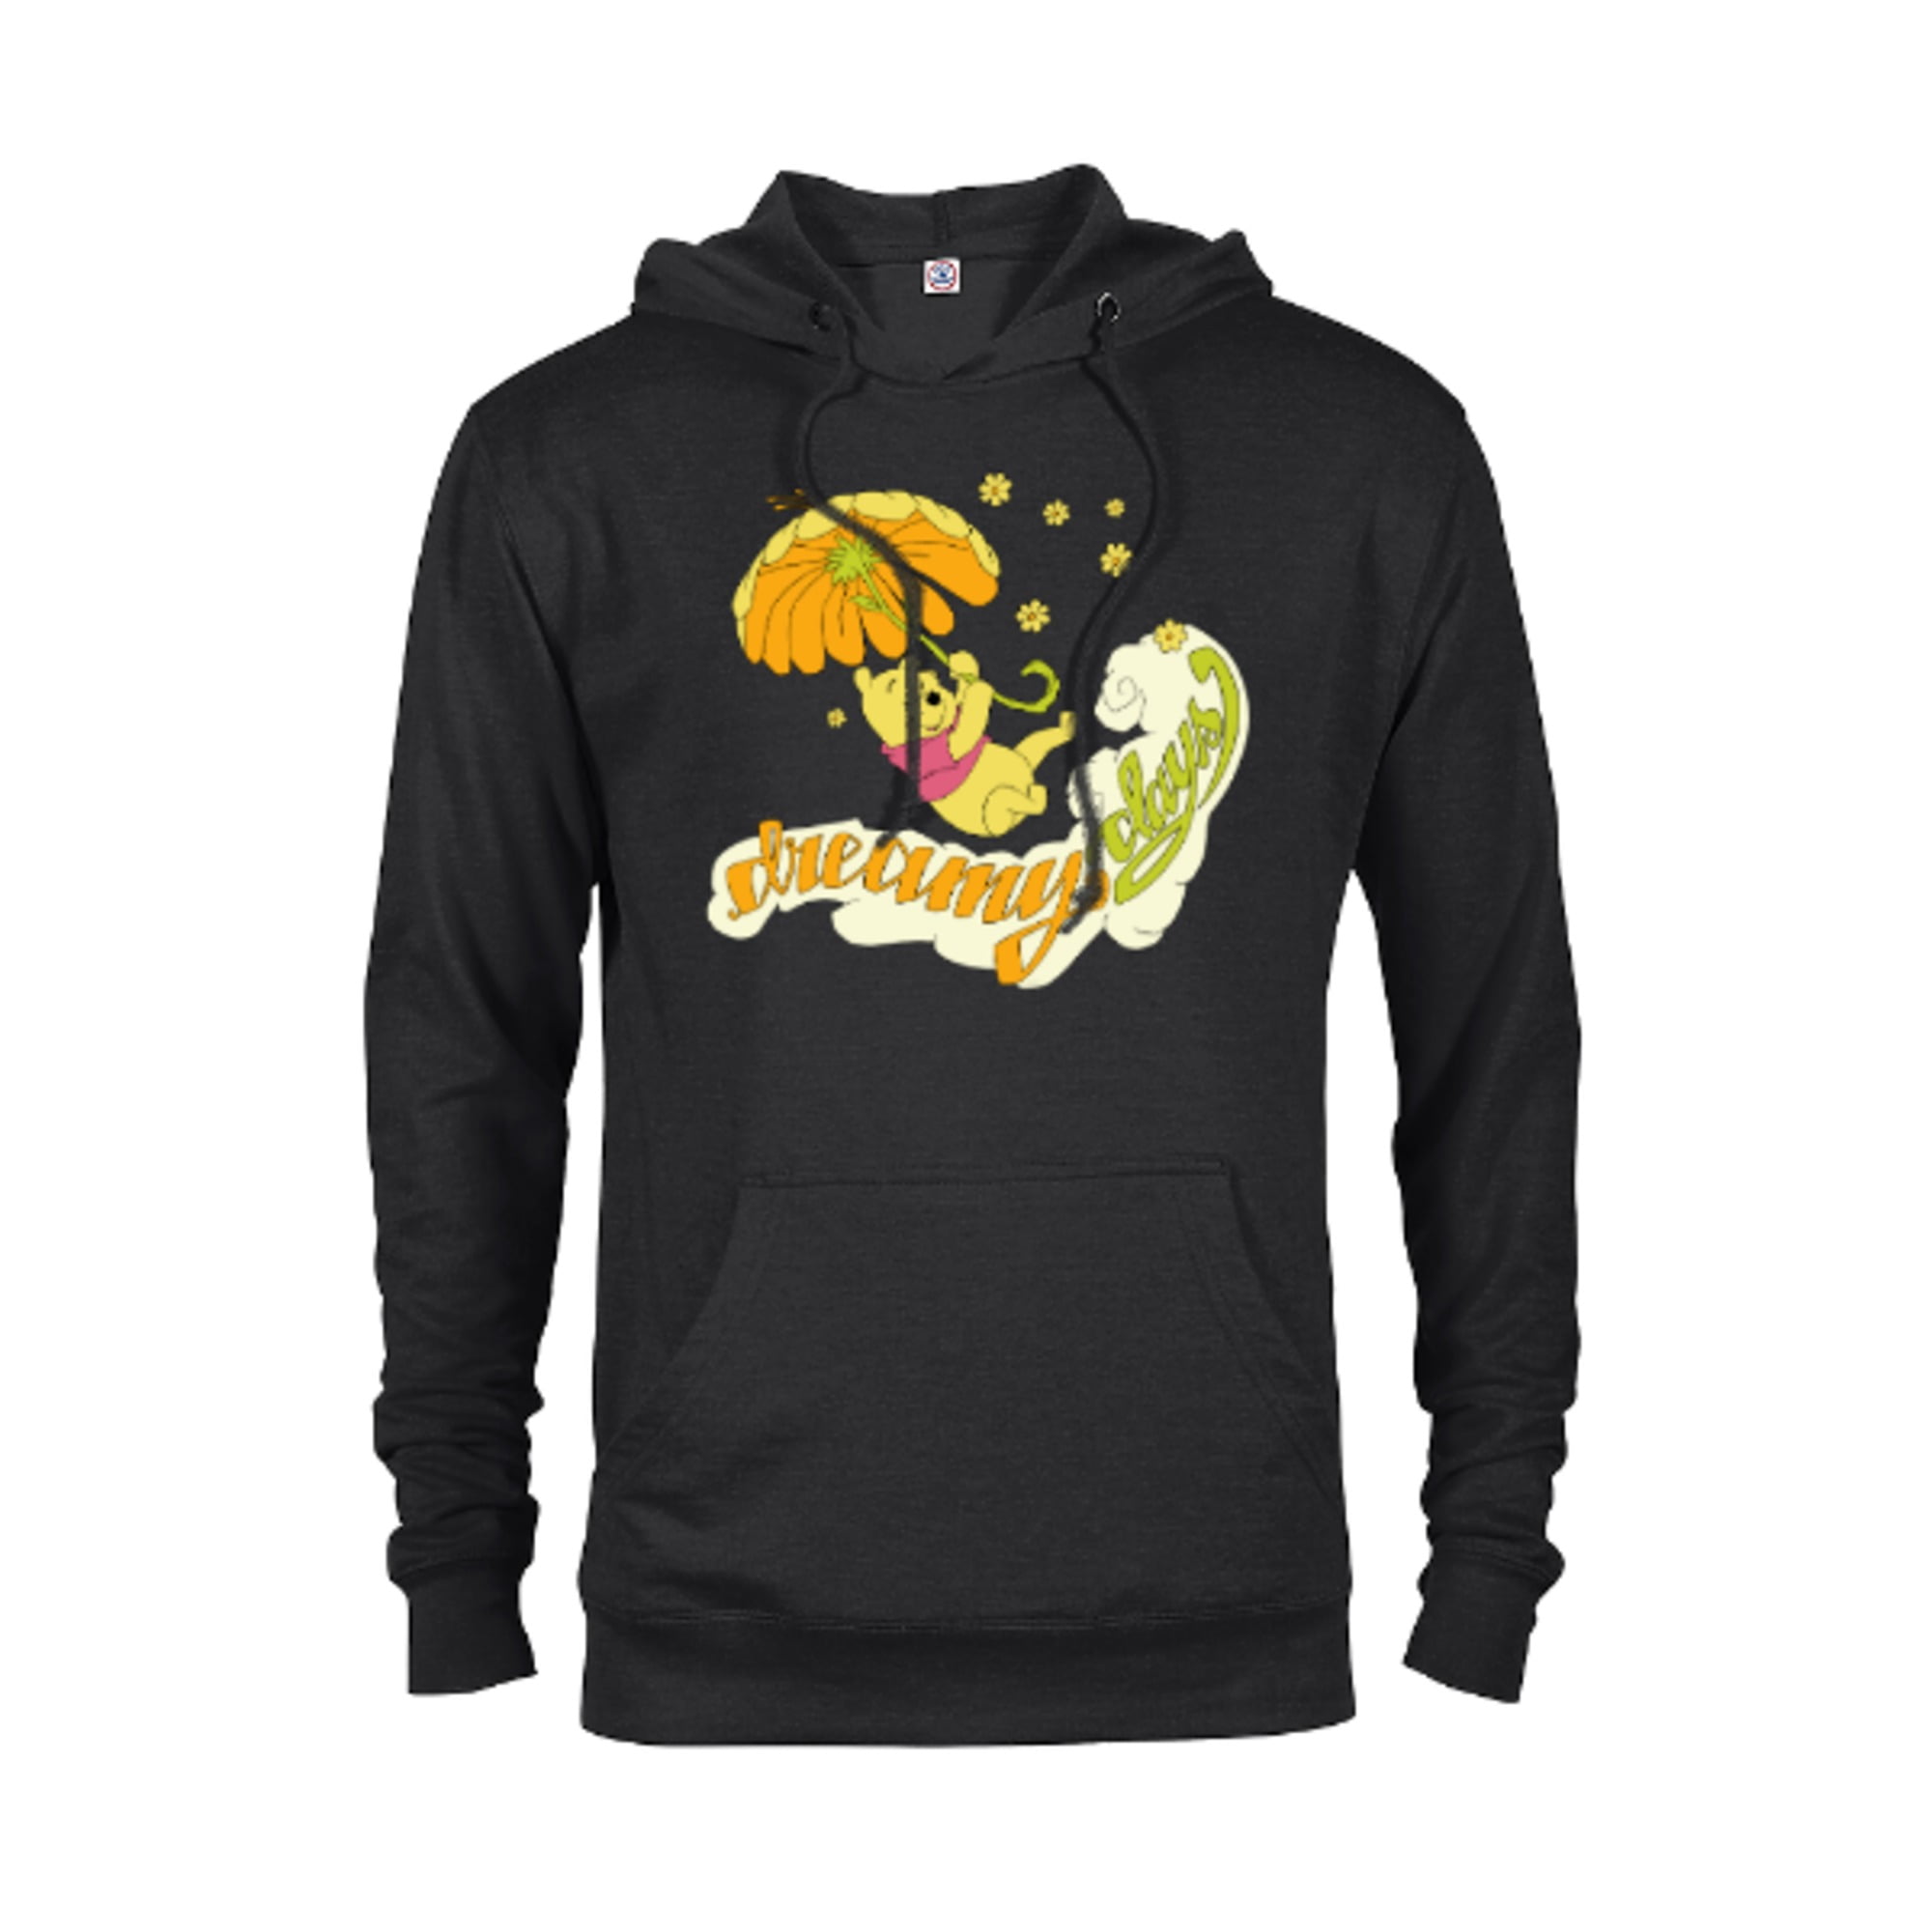 What do we think about the Pooh Bear hoodies ??? 👍or 👎🏻 💩🐻 : r/Bruins